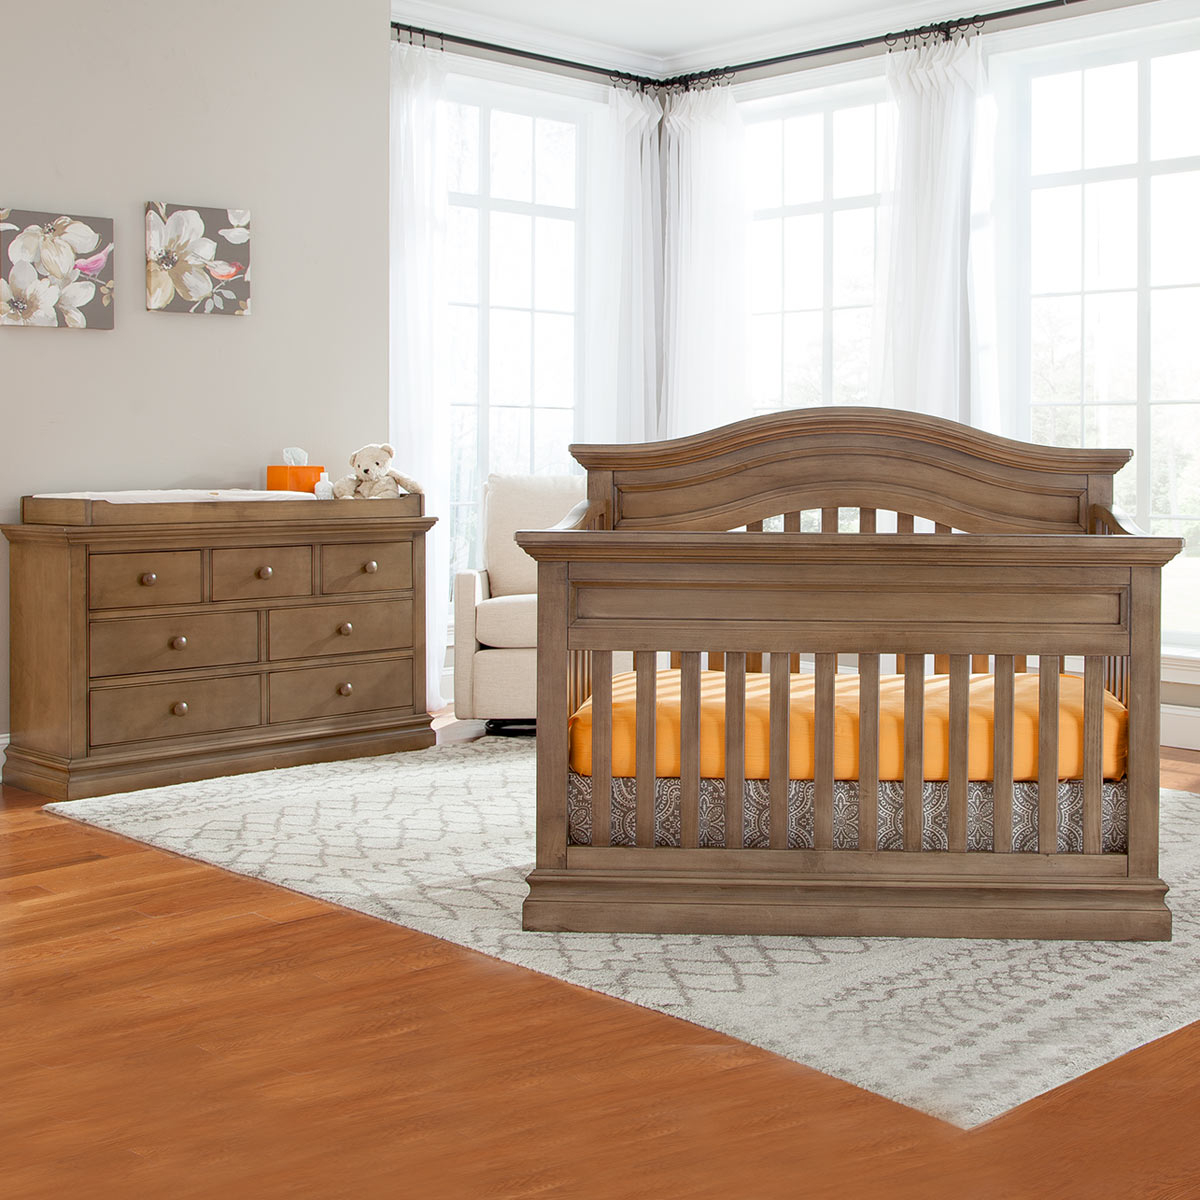 Westwood Design Stone Harbor 2 Piece Nursery Set Convertible Panel Crib And 7 Drawer Dresser In Cashew inside size 1200 X 1200